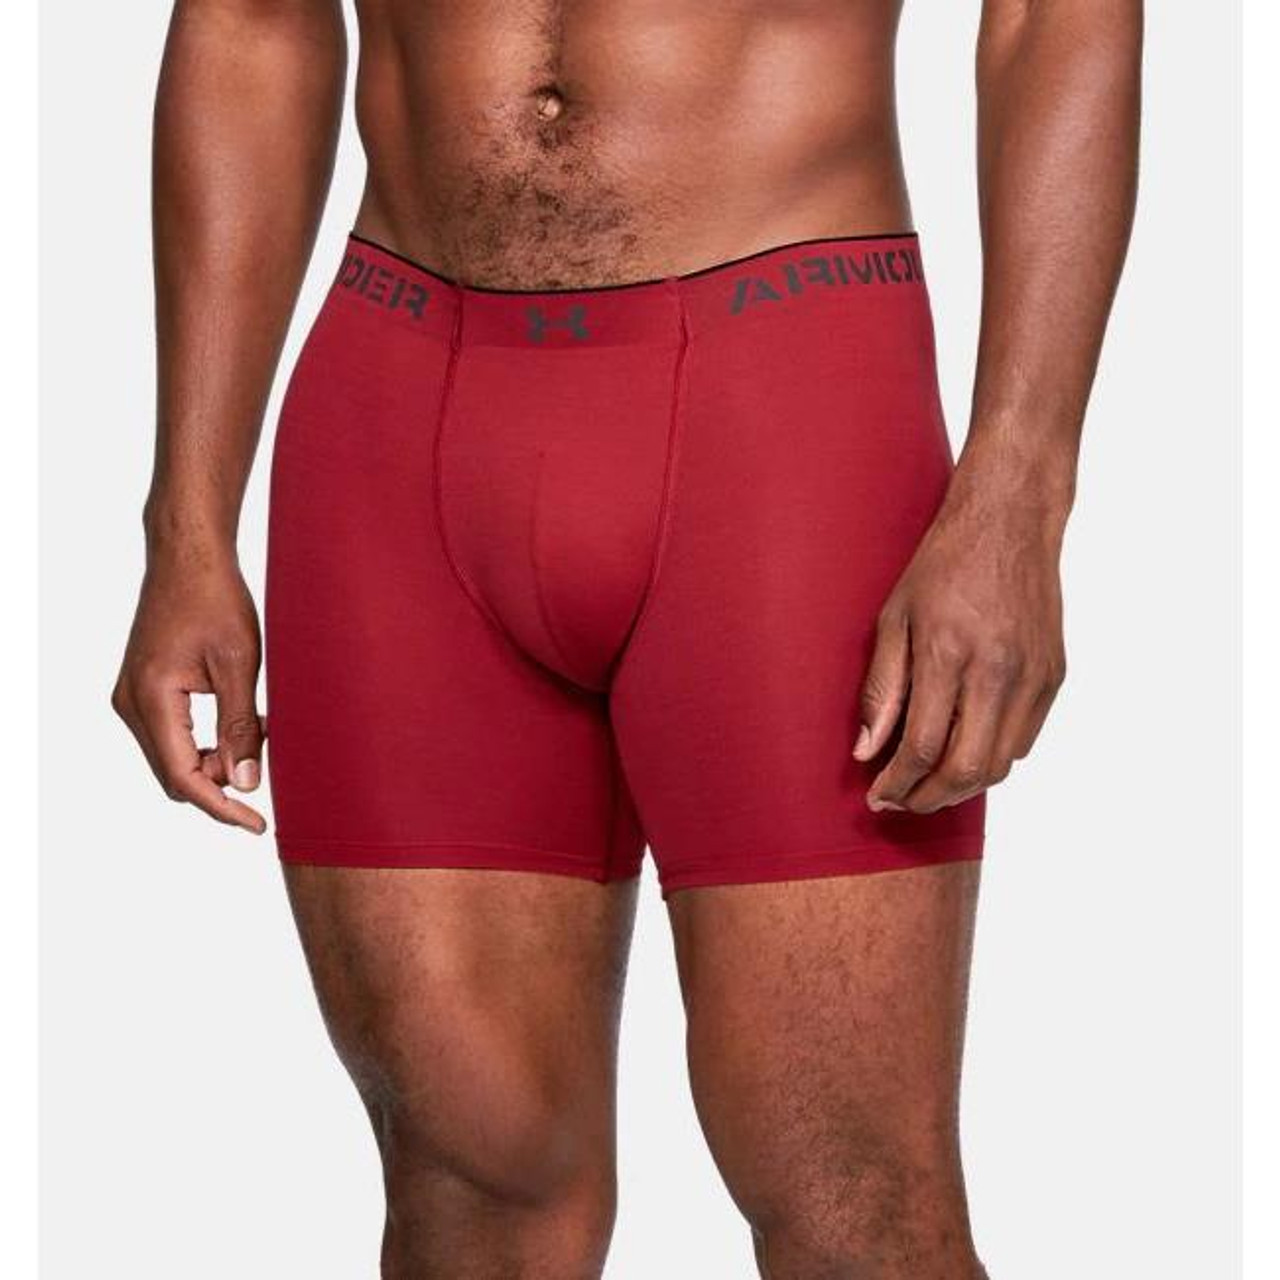 https://cdn11.bigcommerce.com/s-stfpjhht/images/stencil/1280x1280/products/17317/34534/Under-Armour-ArmourVent-Mesh-Series-6-Boxerjock-1326770-192007819836_image1__53389.1551215926.jpg?c=2